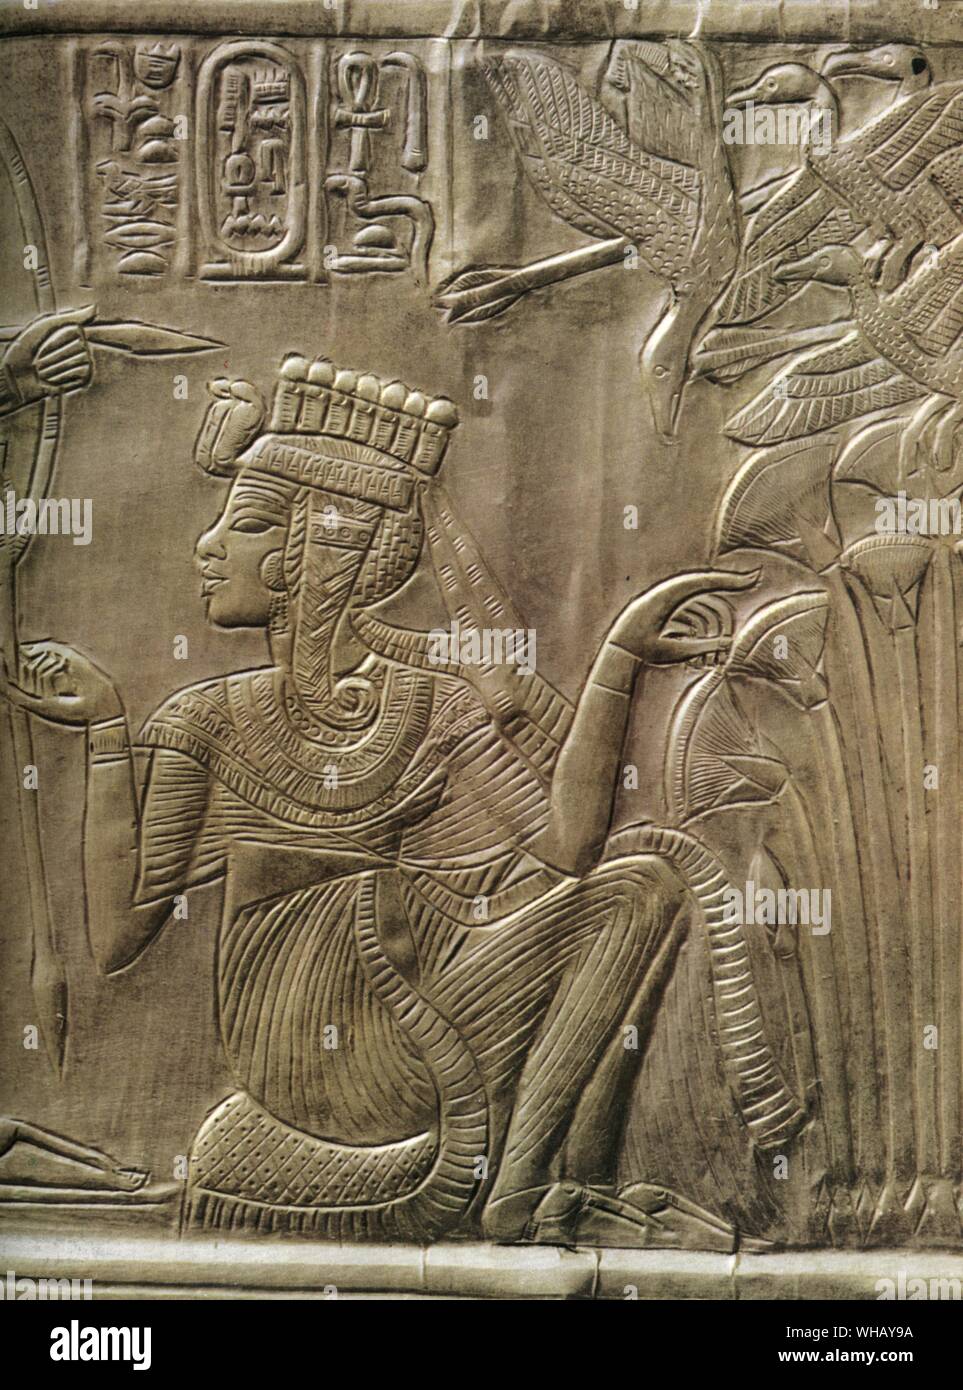 Detail of the gilded shrine showing the Queen Ankhesenamun at the feet of the king. Tukankhamen, by Christiane Desroches Noblecourt, page 251.. The external walls and the doors of the shrine are subdivided into panels framed by hieroglyphic inscriptions with scenes showing Tutankhamun and his wife in various aspects of married life, a theme that recalls the scenes of the Amarna Period. The entire decorative scheme of the shrine has strong symbolic connotations associated with the religious and political spheres. The intimate ties between the pharaoh and his bride represent the serene Stock Photo